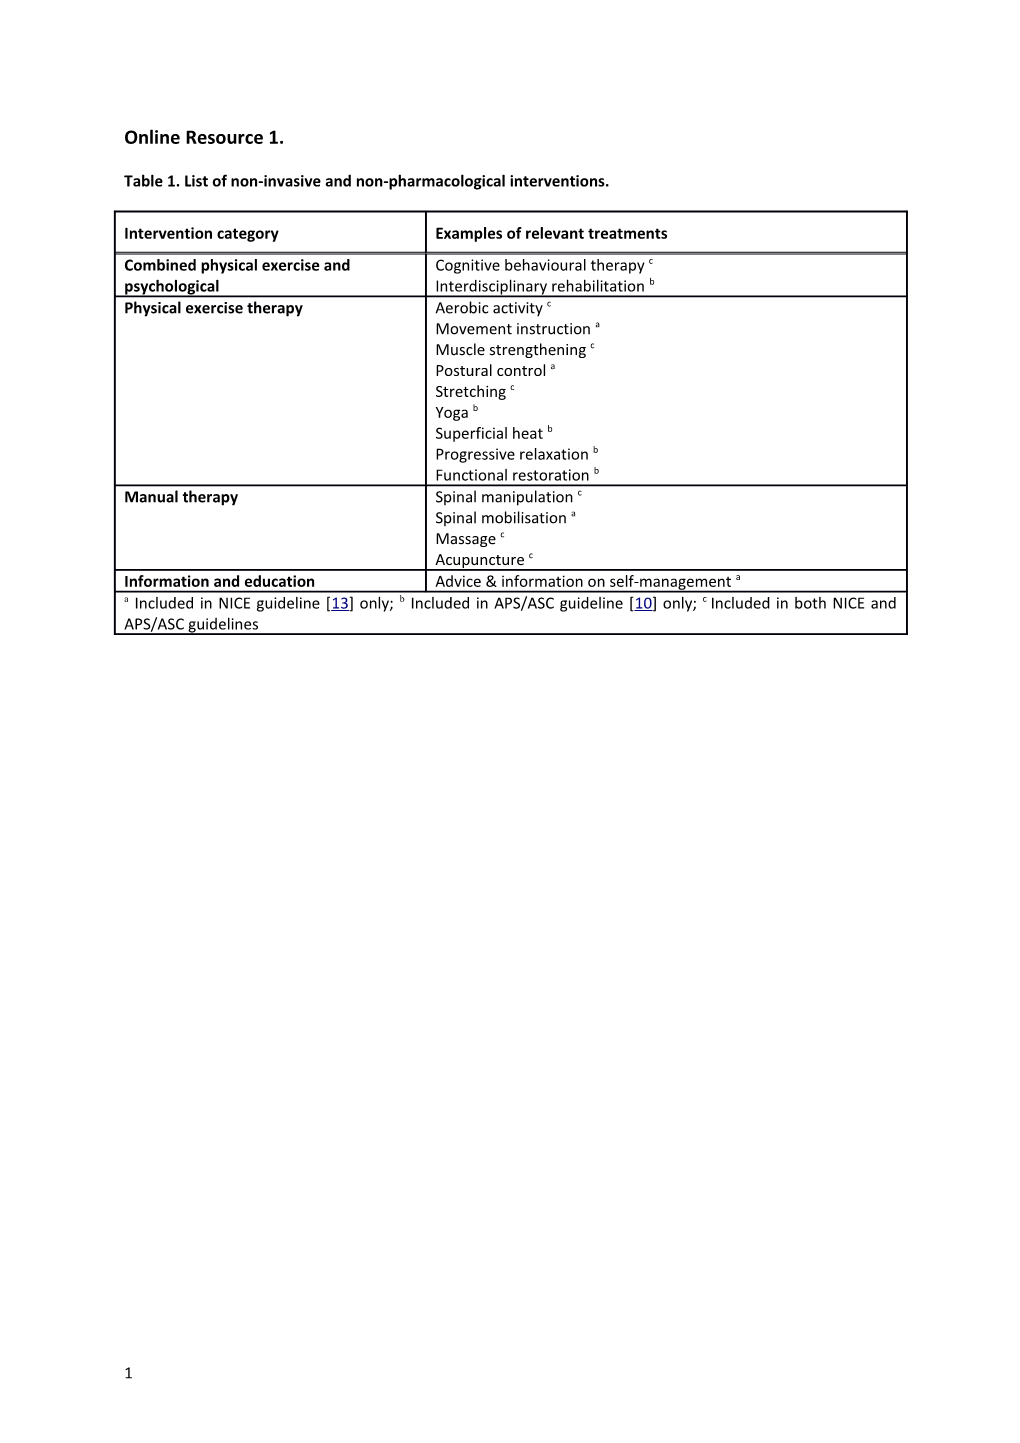 Table 1. List of Non-Invasive and Non-Pharmacological Interventions